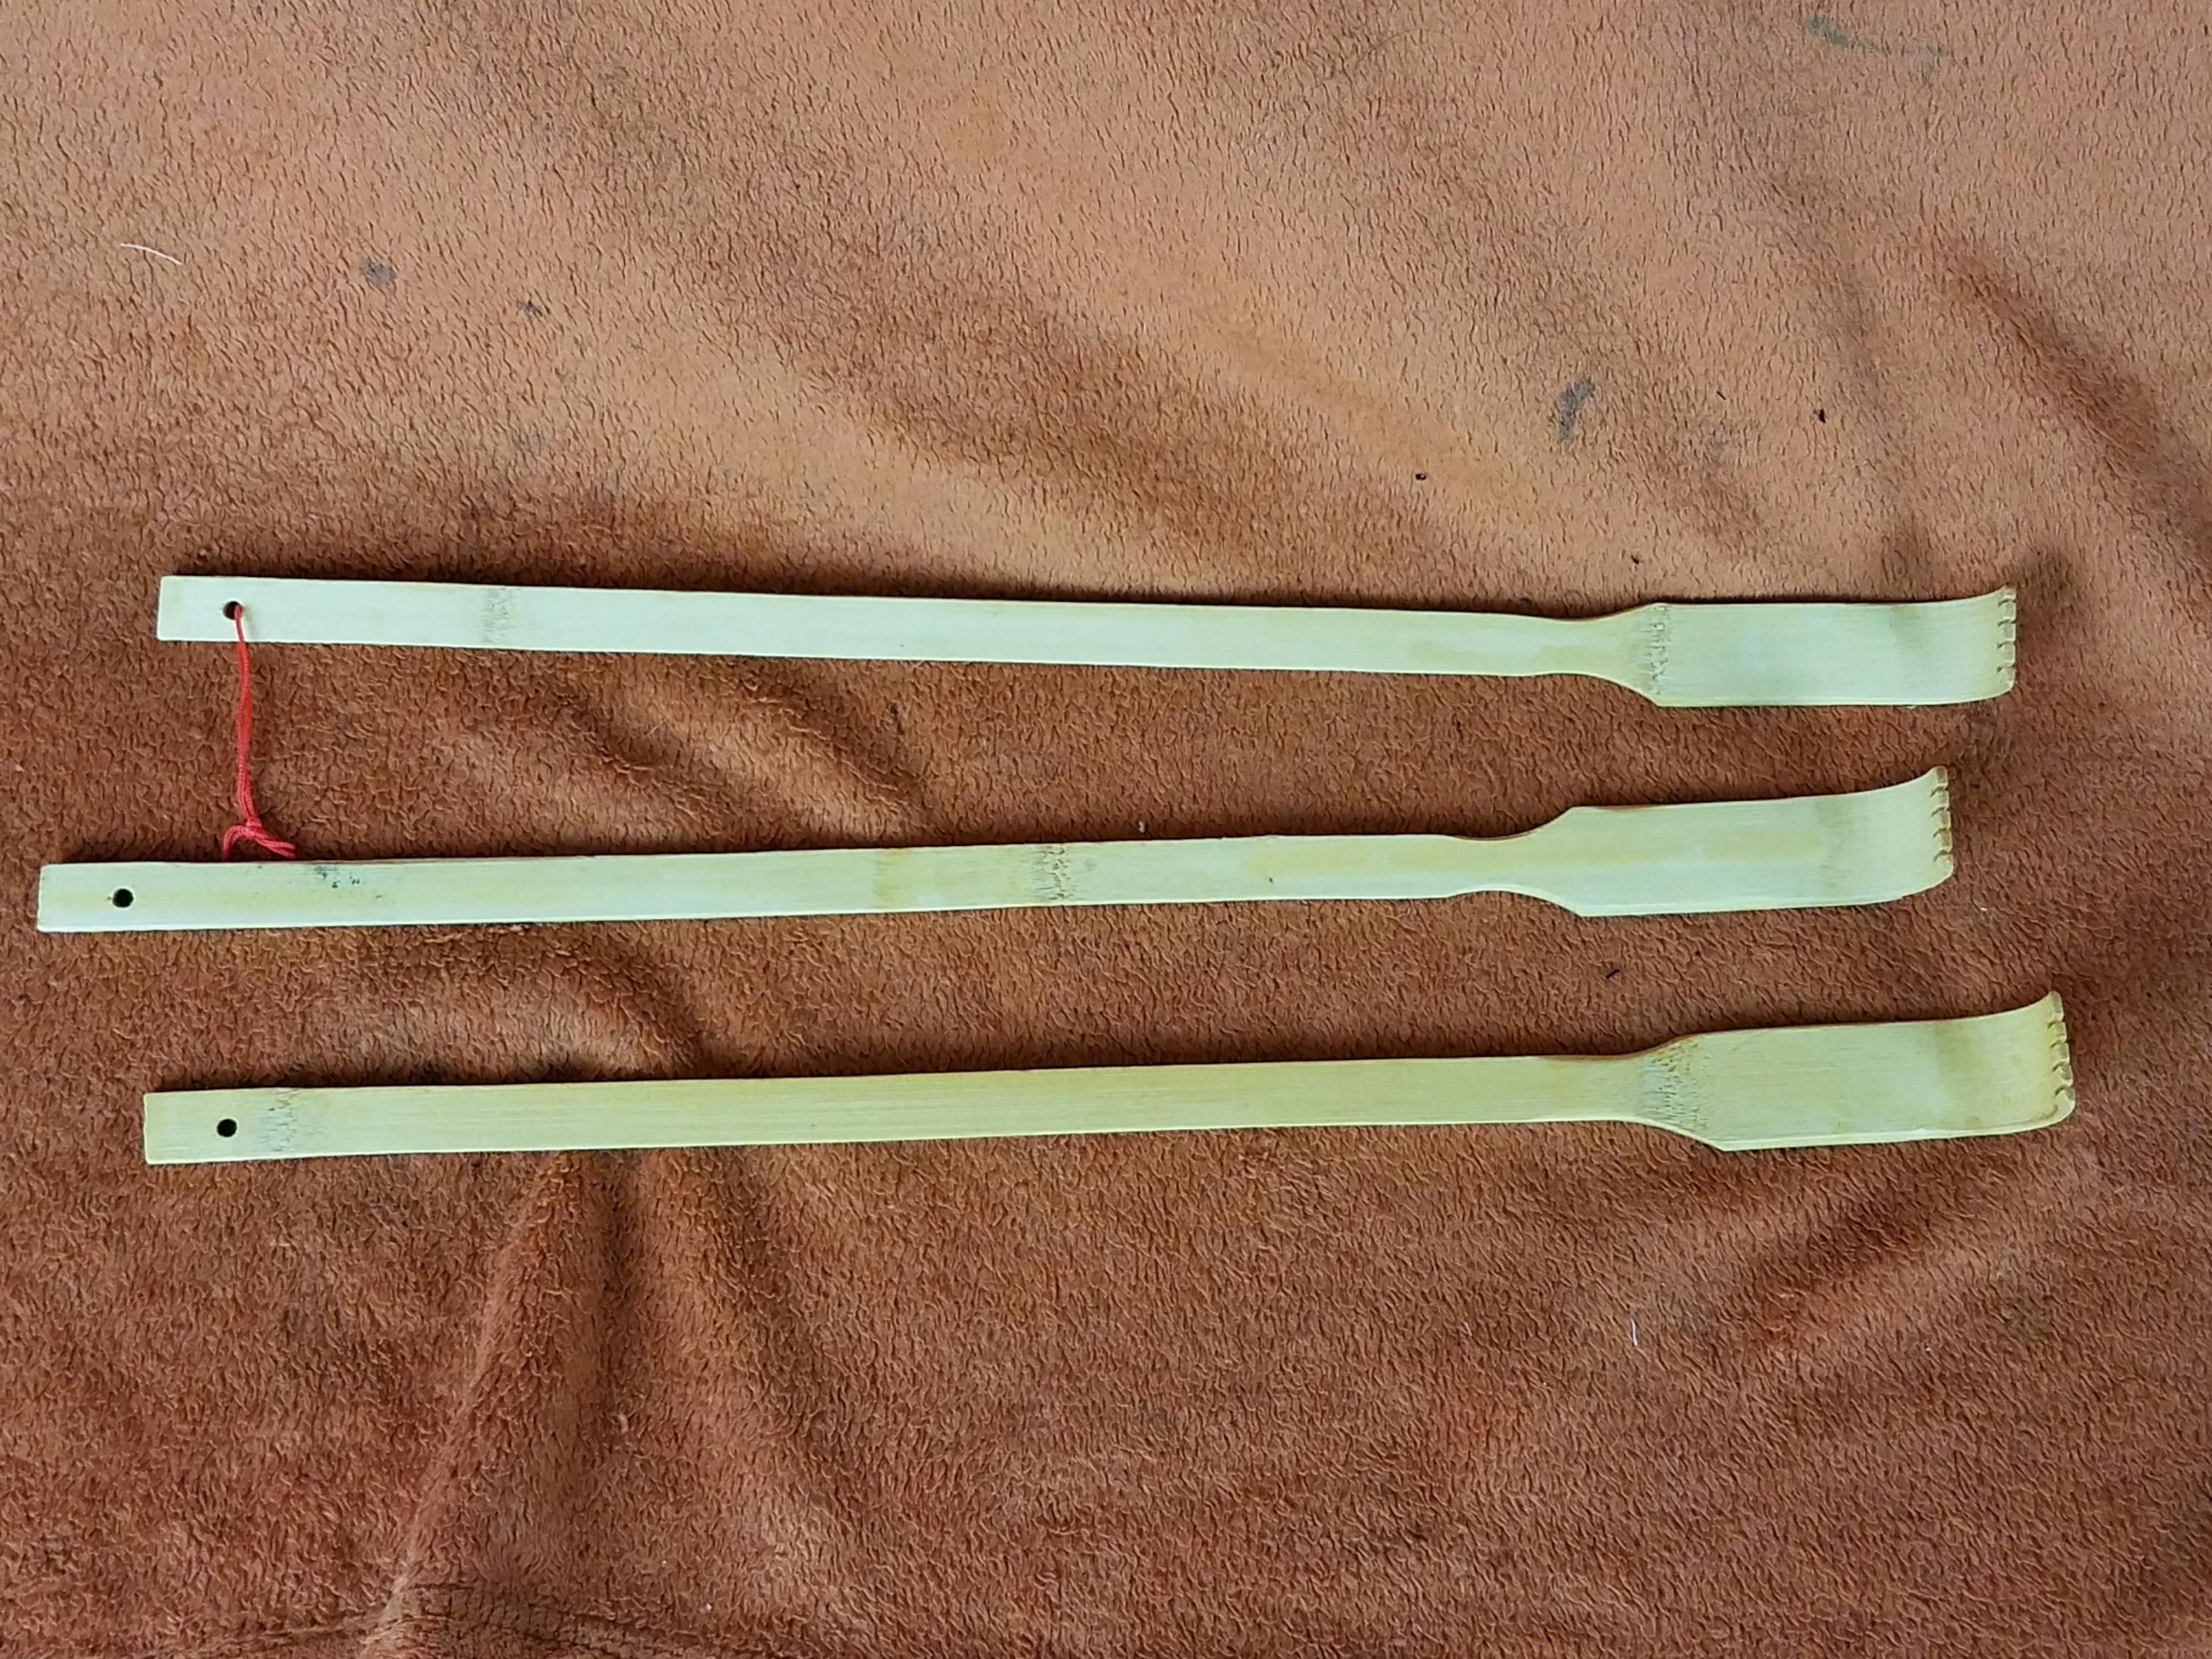 Bamboo back scratchers are high quality, very durable, sturdy, & will effectively help you scratch the annoying itches that you can't reach.